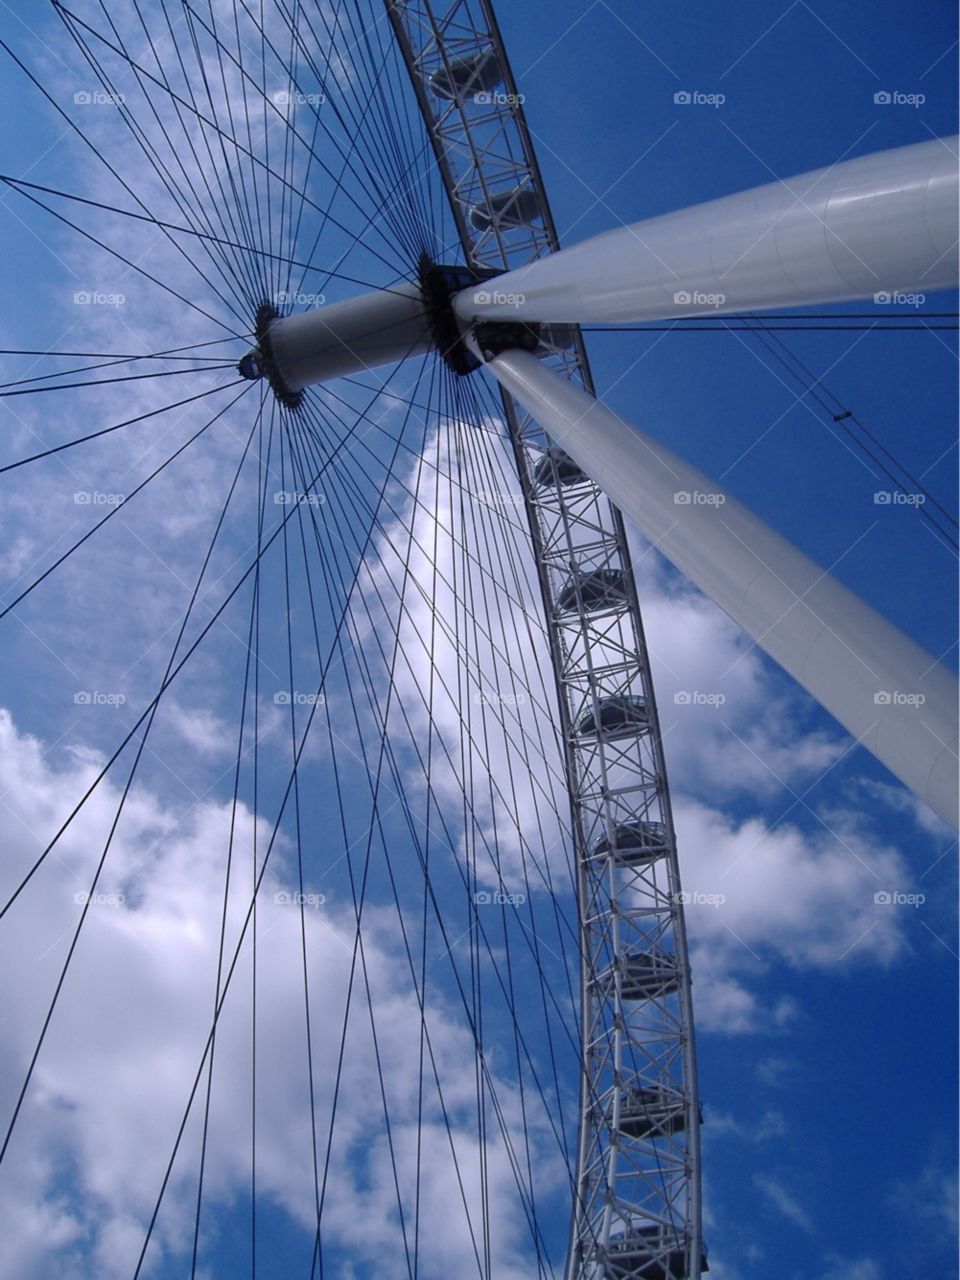 Looking up at the London Eye. London, England. 